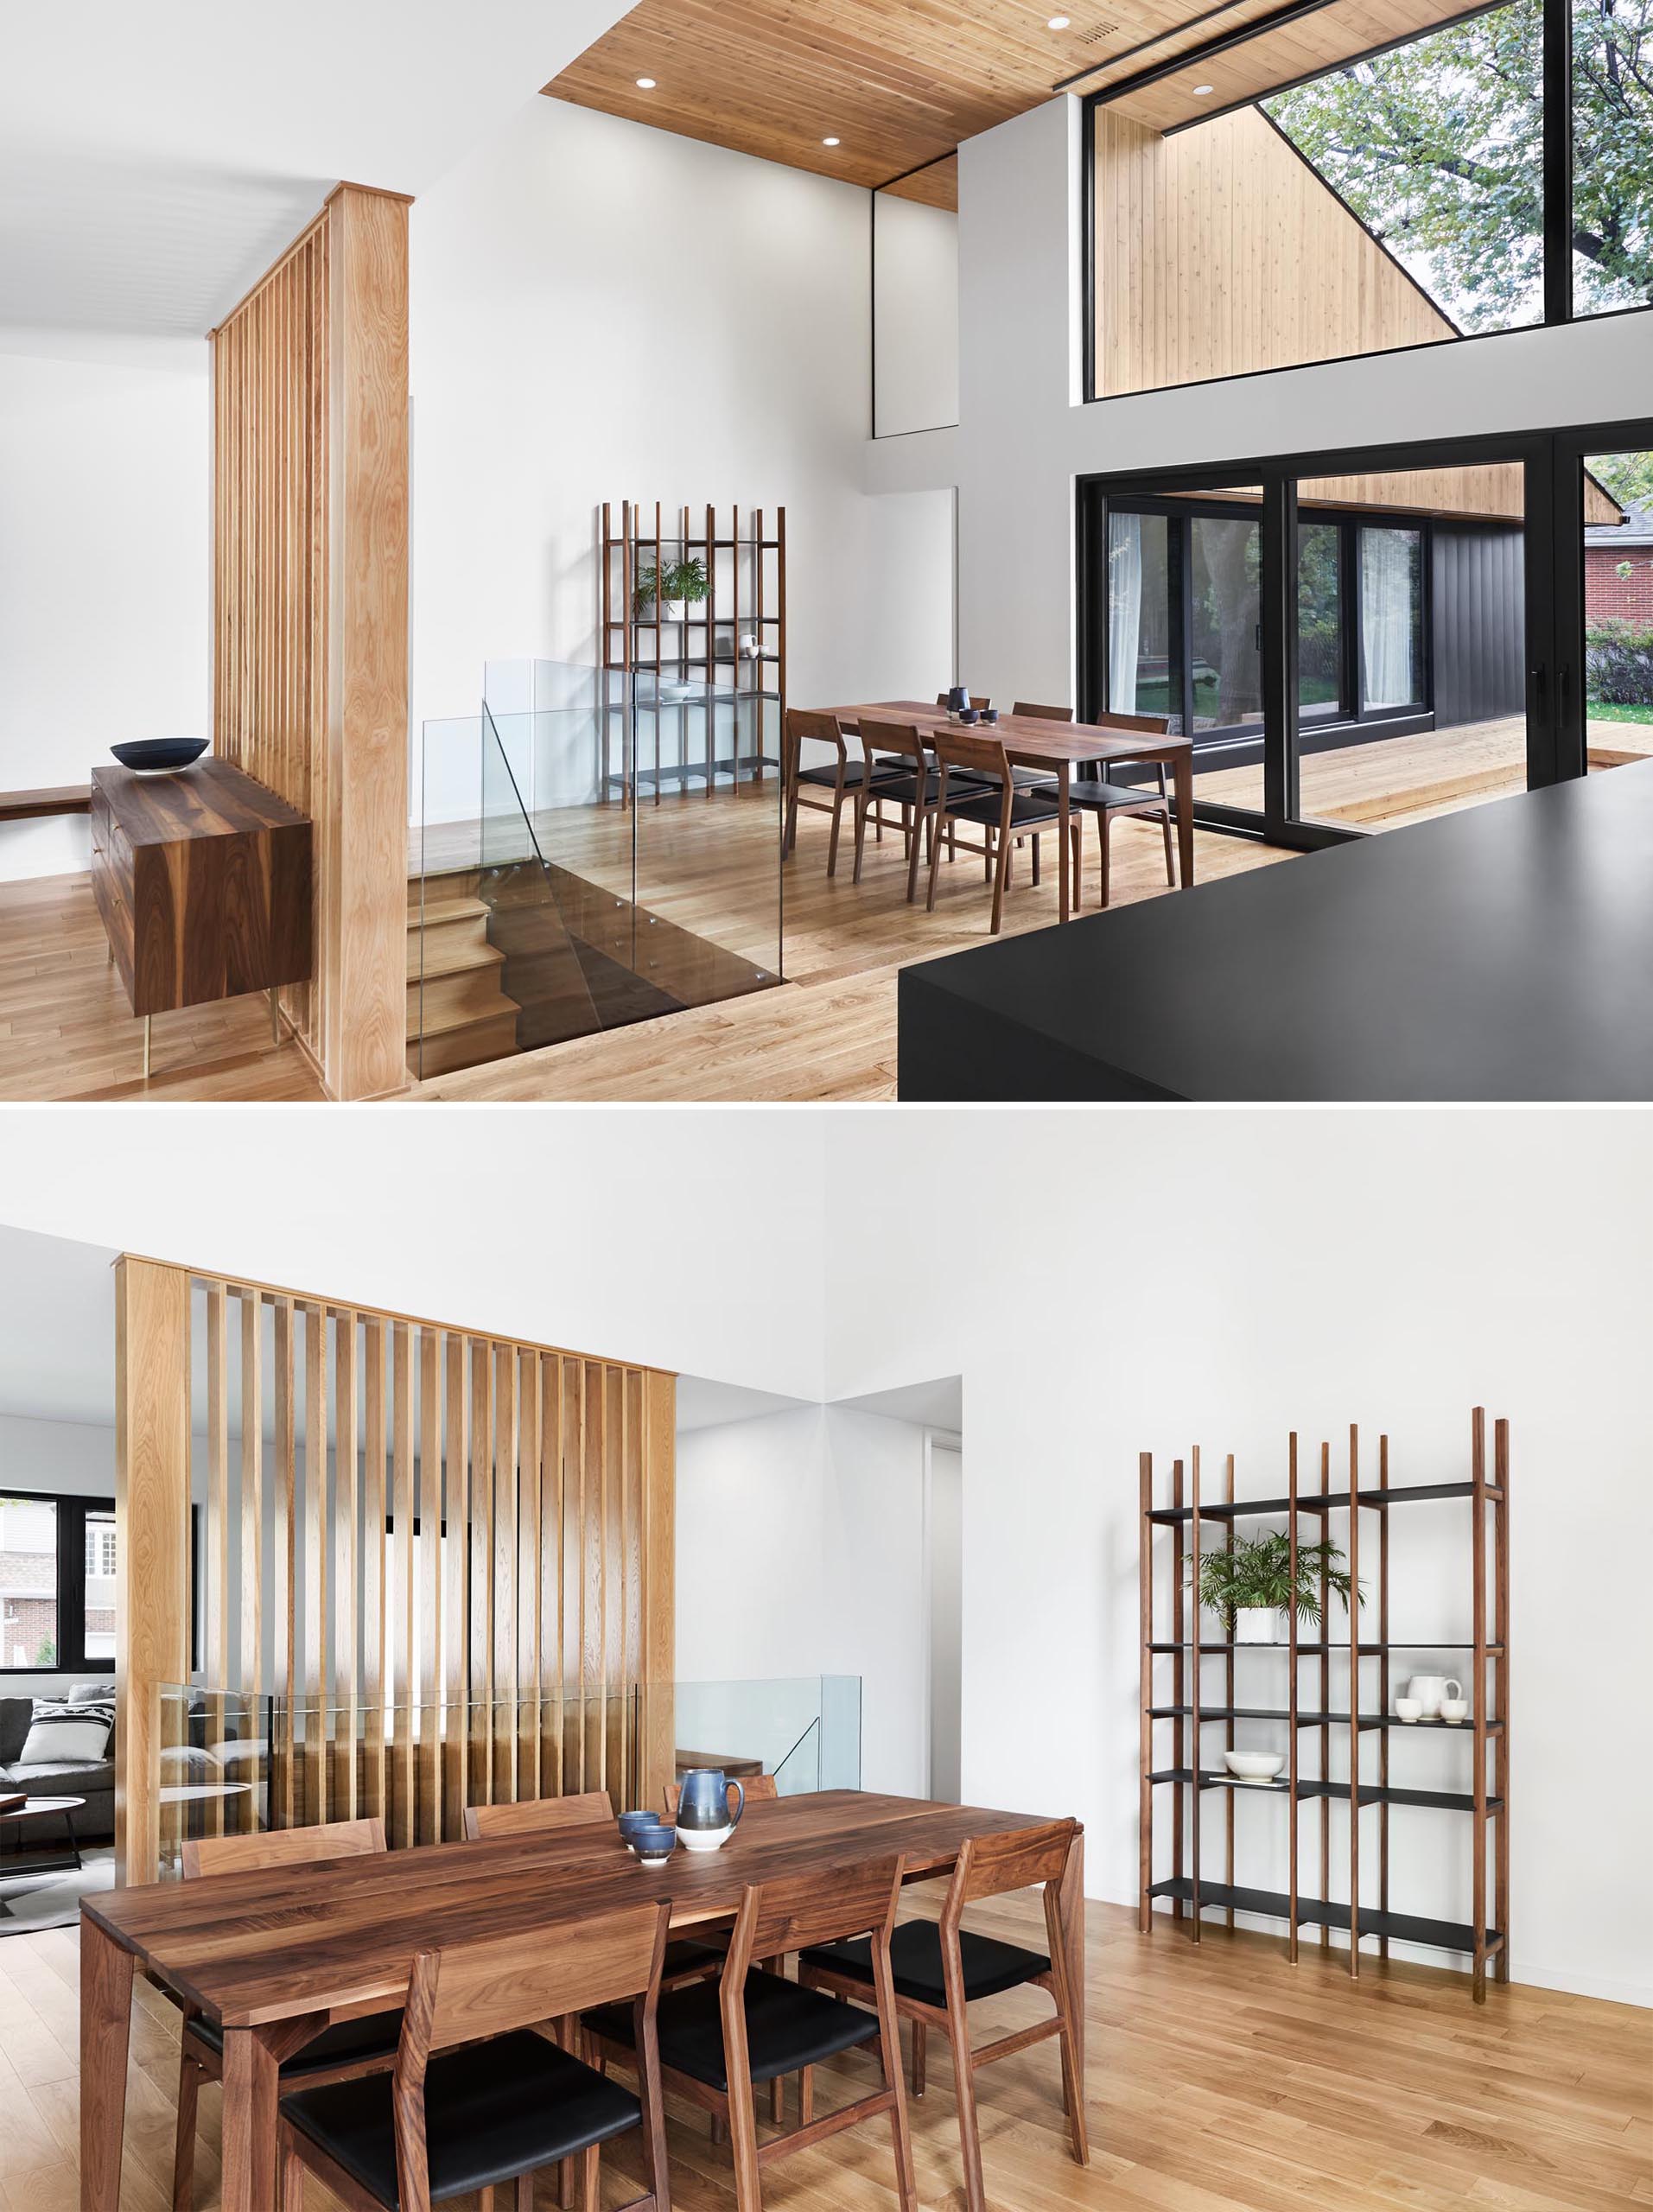 A modern dining room with high ceilings, glass stair railings, and a wood partition screen.